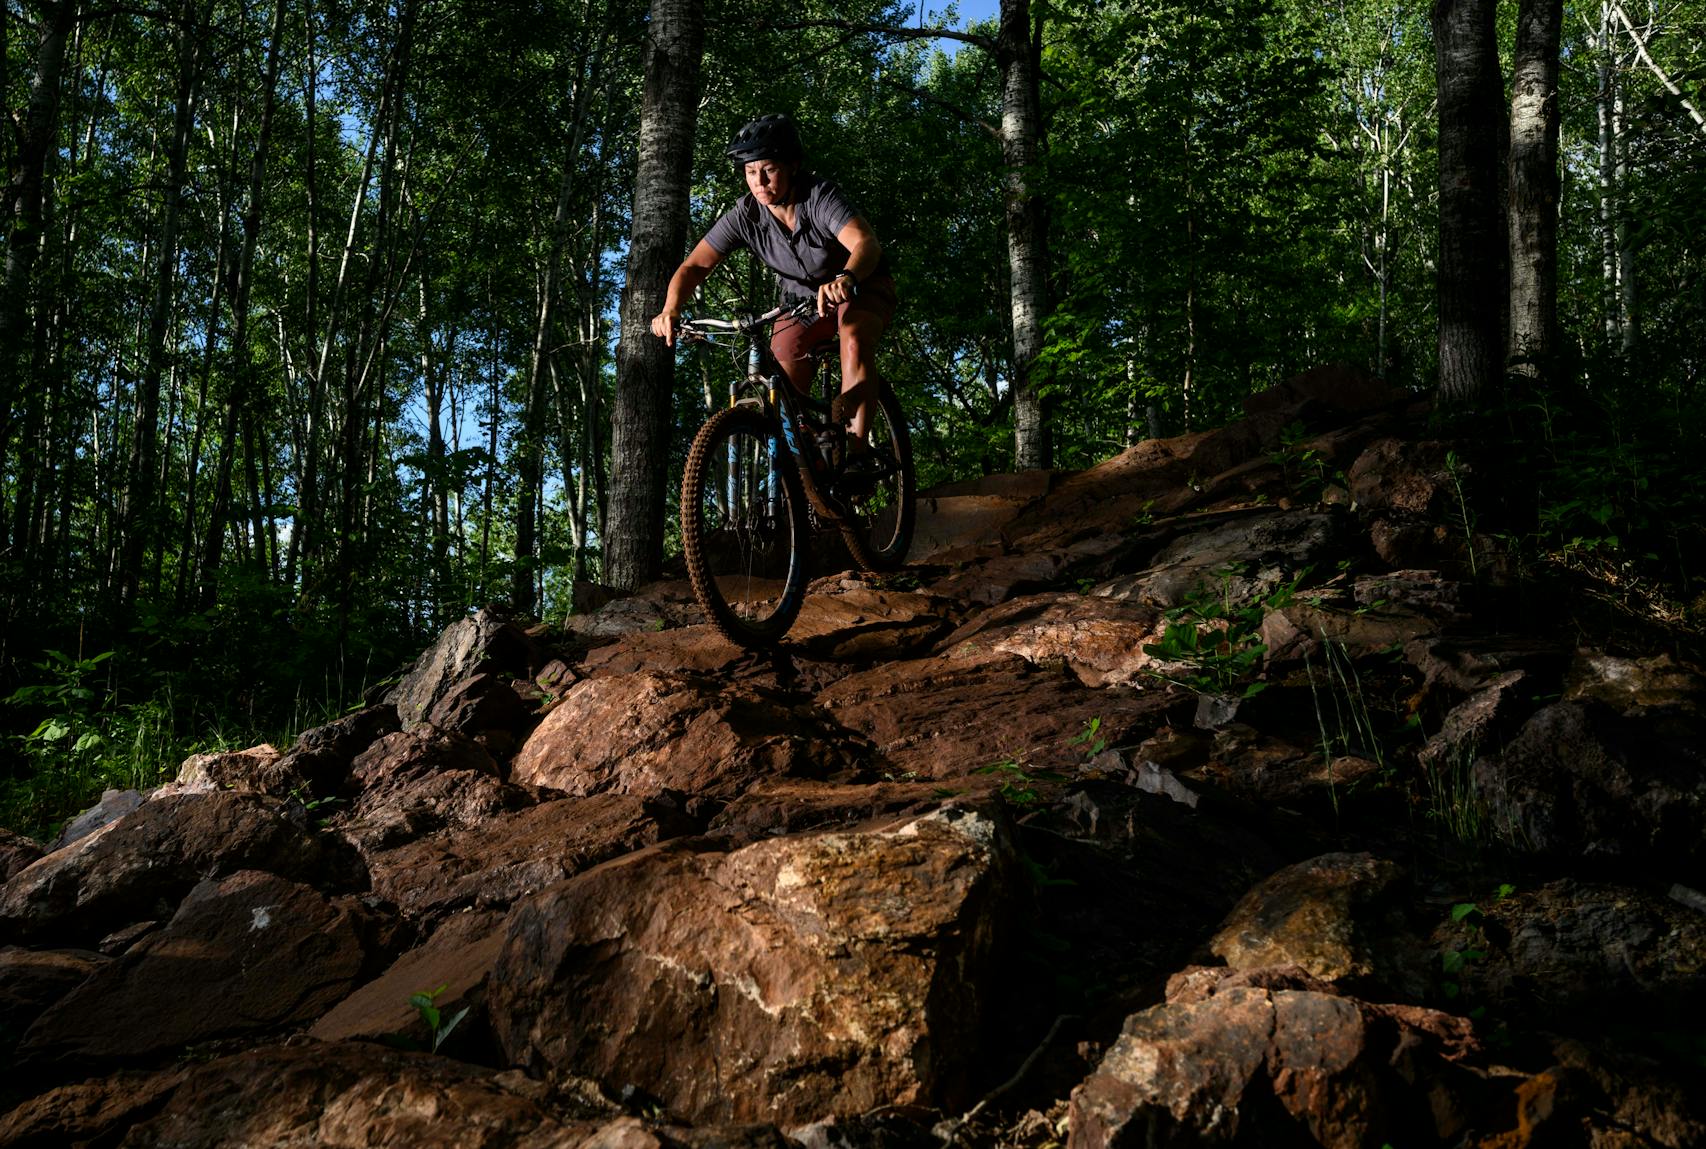 Mari Kivisto navigated a rock wall on the Drawpoint Trail as night came to the Cuyuna Country State Recreation Area. 